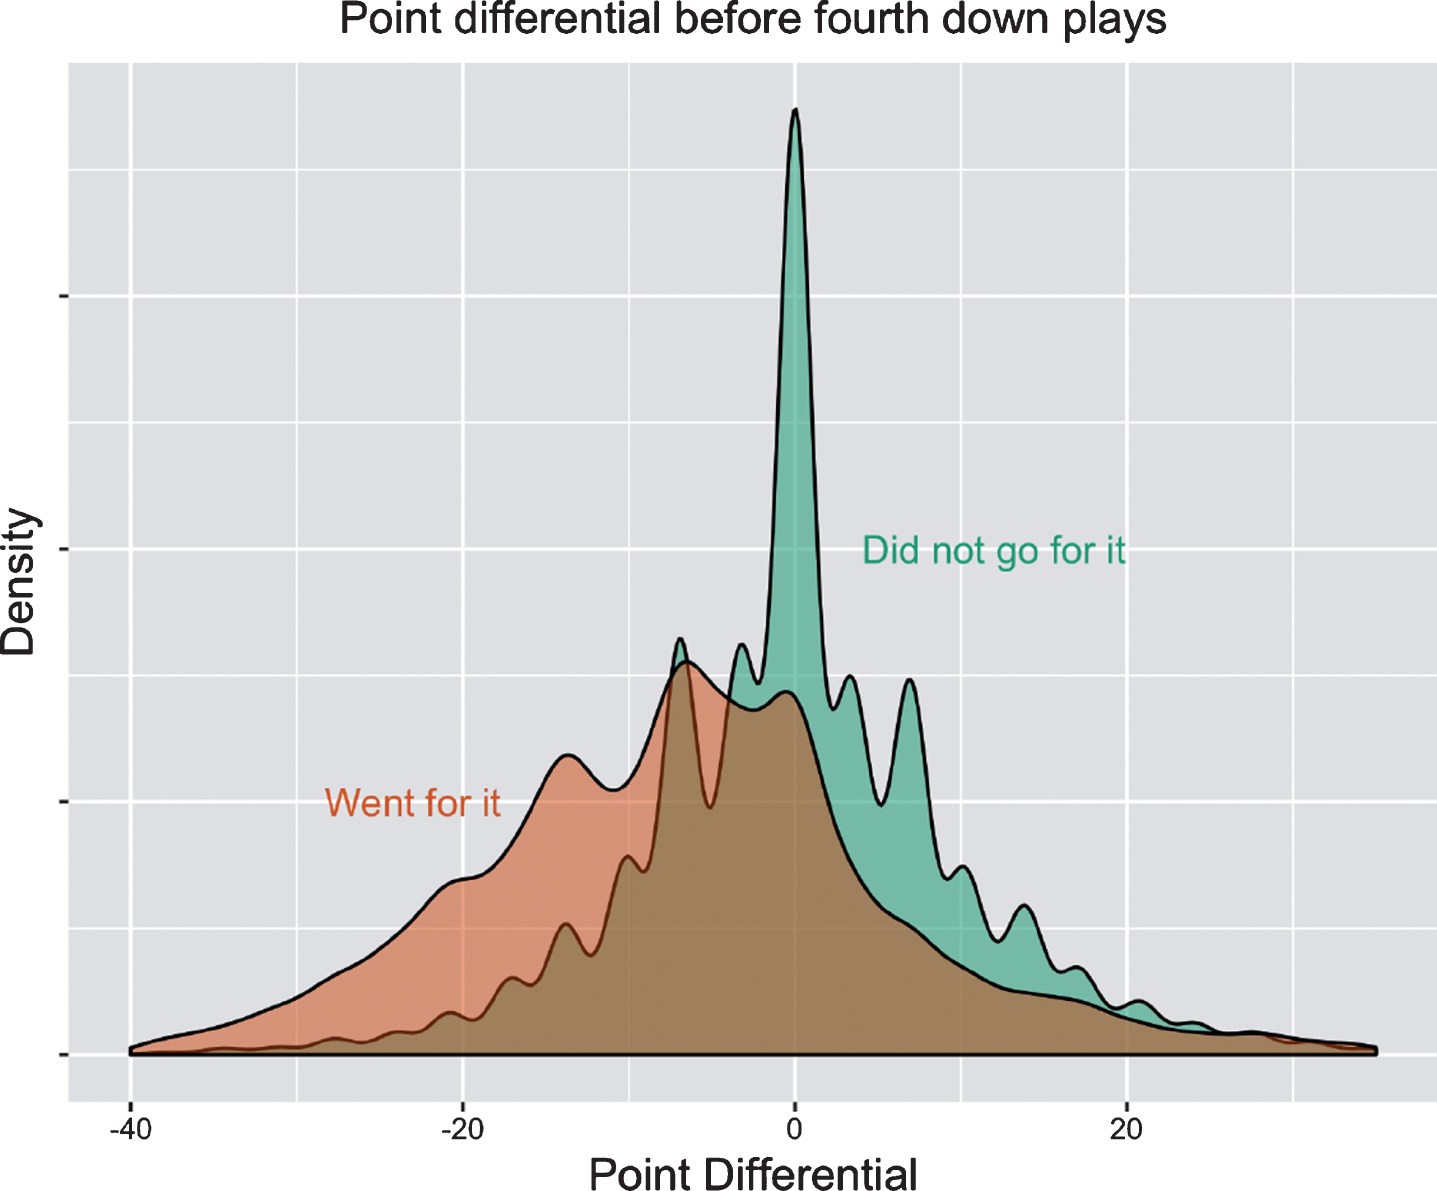 Density curves showing the distributions of point differential (relative to the offensive team) among teams that went for it on fourth down and teams that did not. Shown are all fourth down plays from the 2004 through 2016 seasons (37,103 total plays) of the National Football League, using regular season games only.